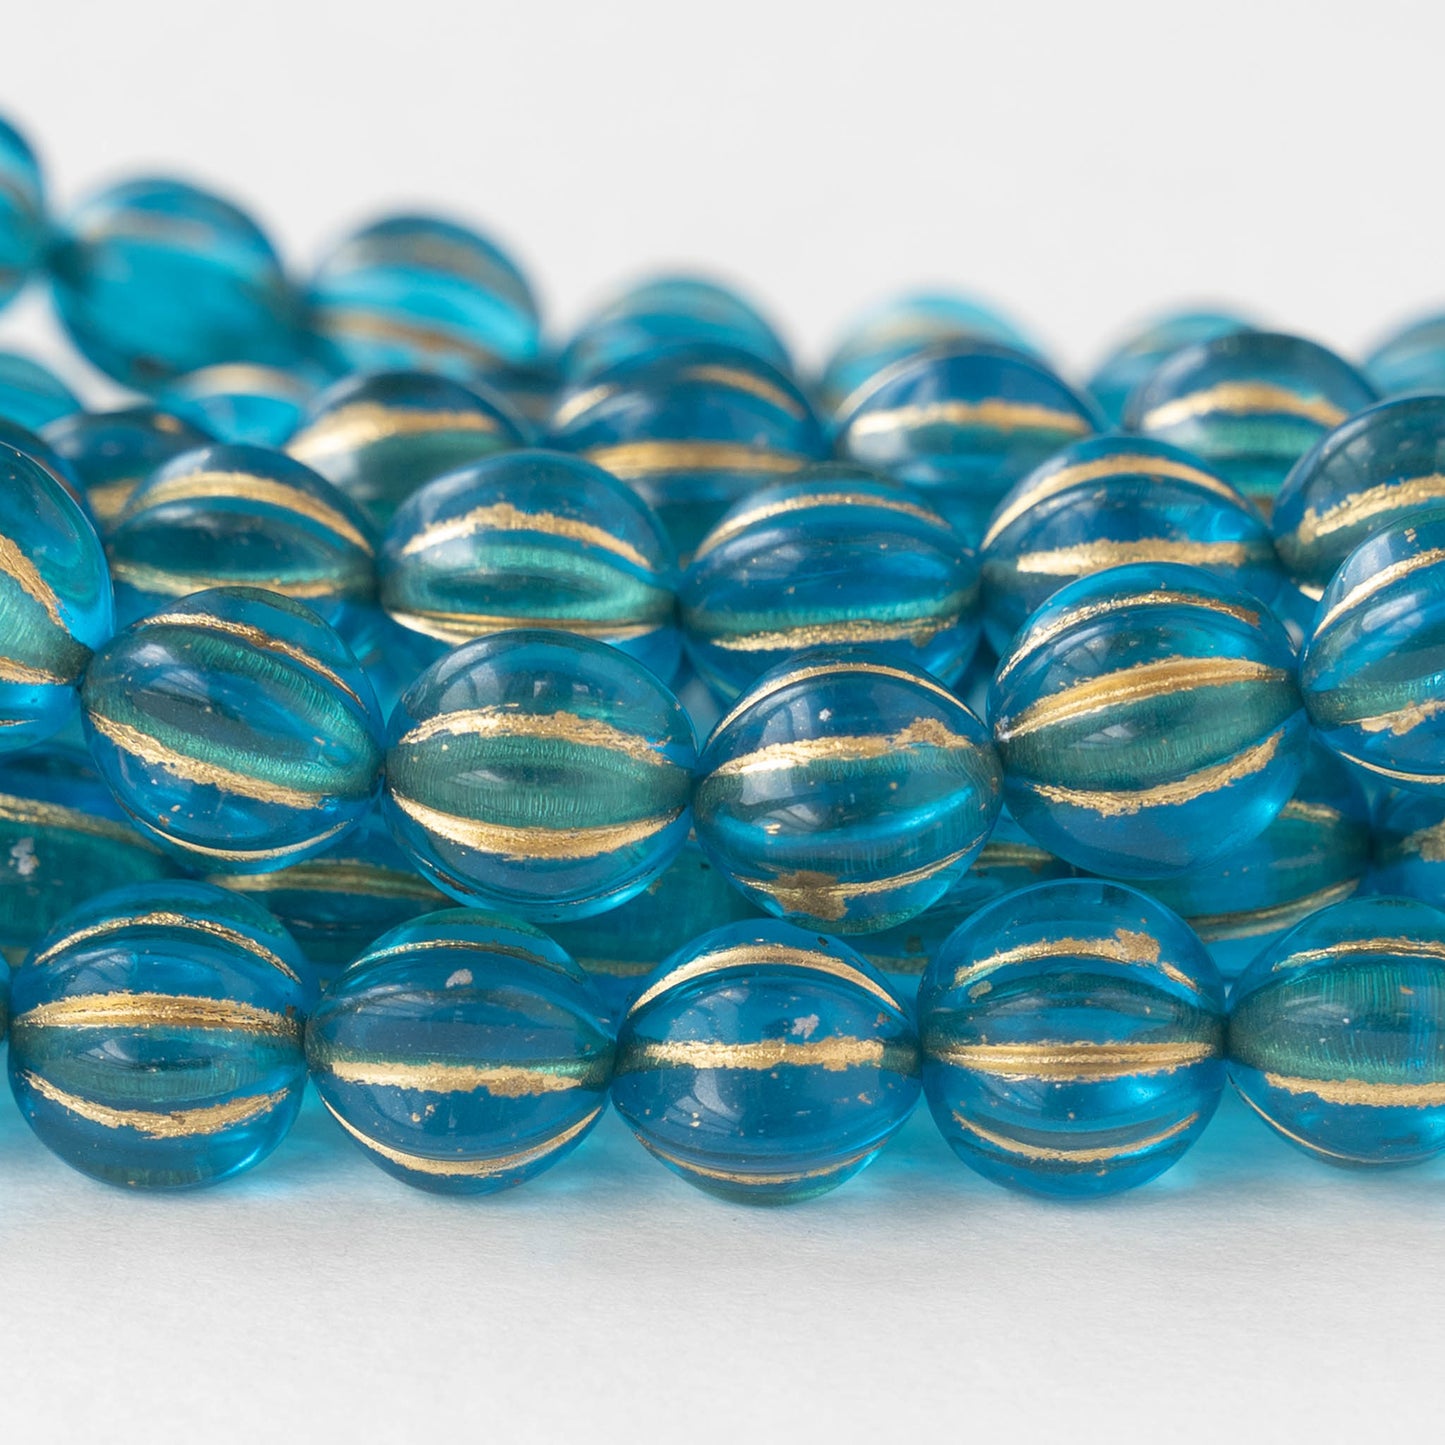 10mm Glass Melon Beads - Teal with Gold Wash - 25 beads